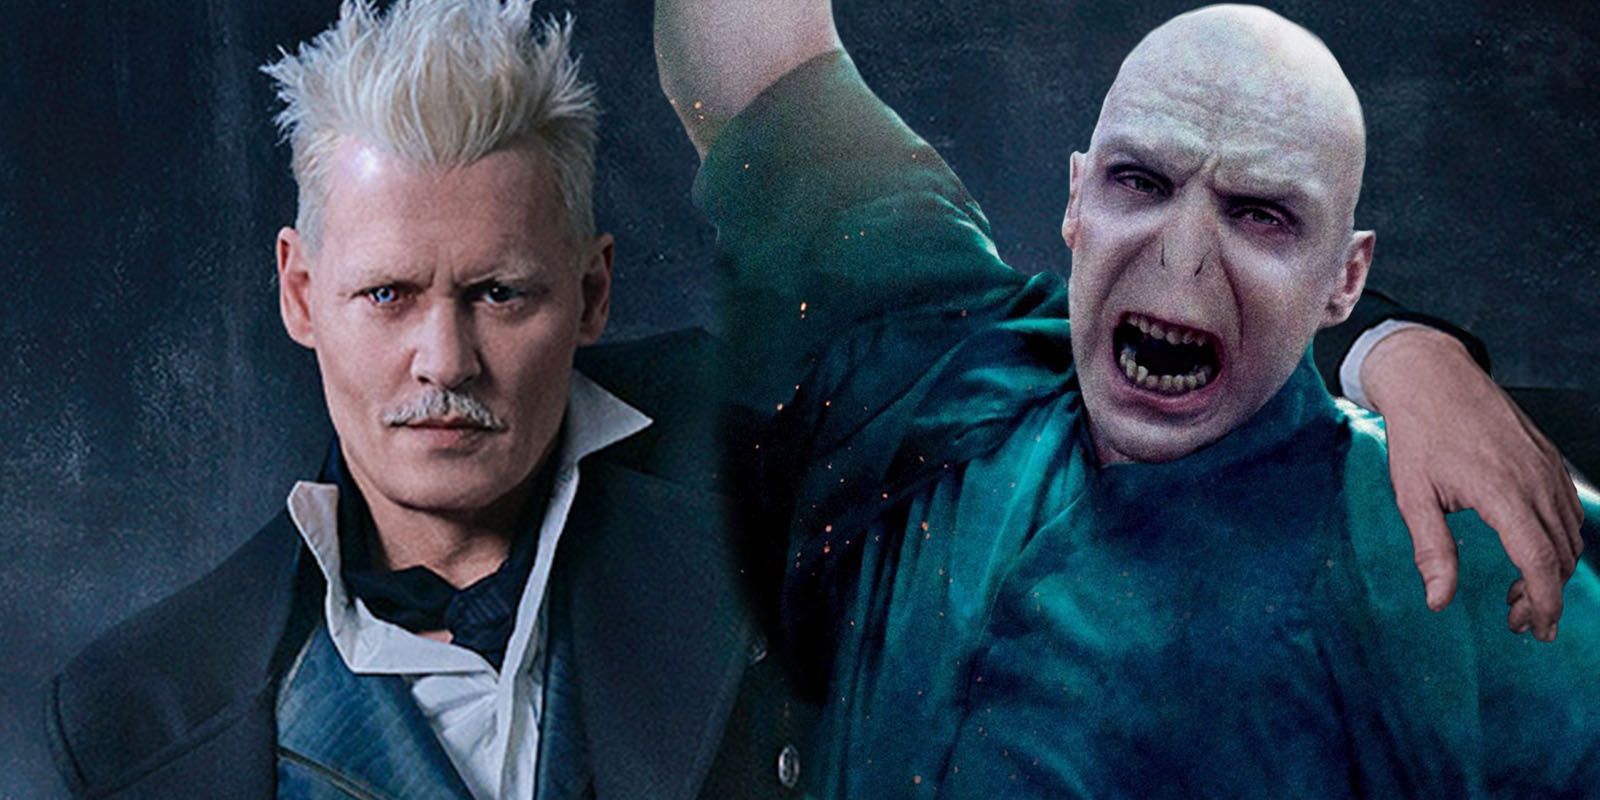 Fantastic Beasts' Grindelwald Is A Better Villain Than Voldemort